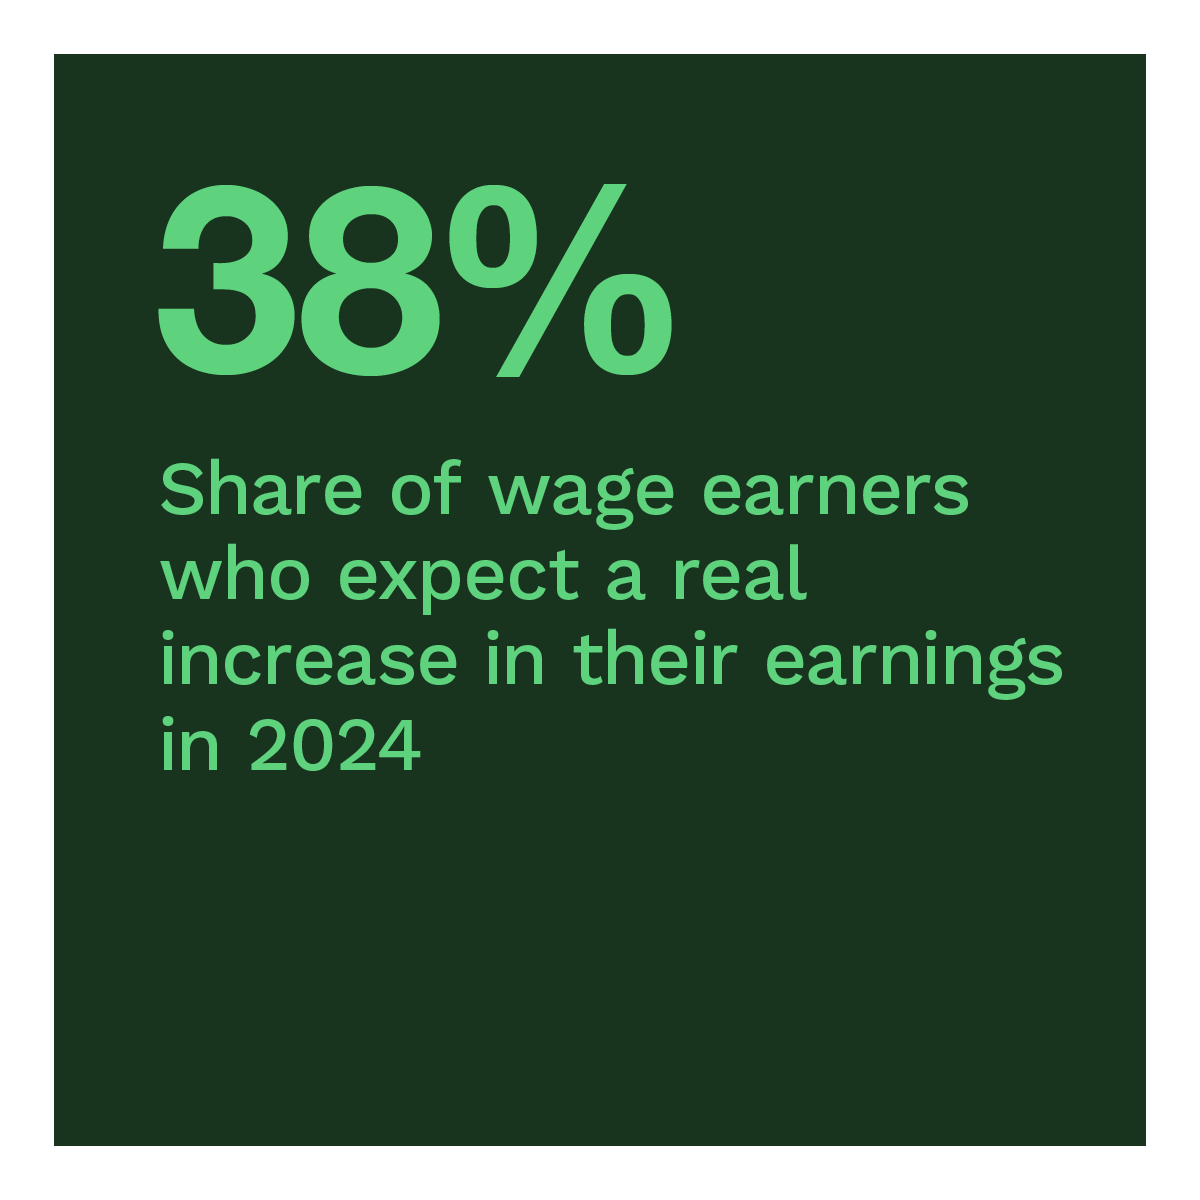 38%: Share of wage earners who expect a real increase in their earnings in 2024